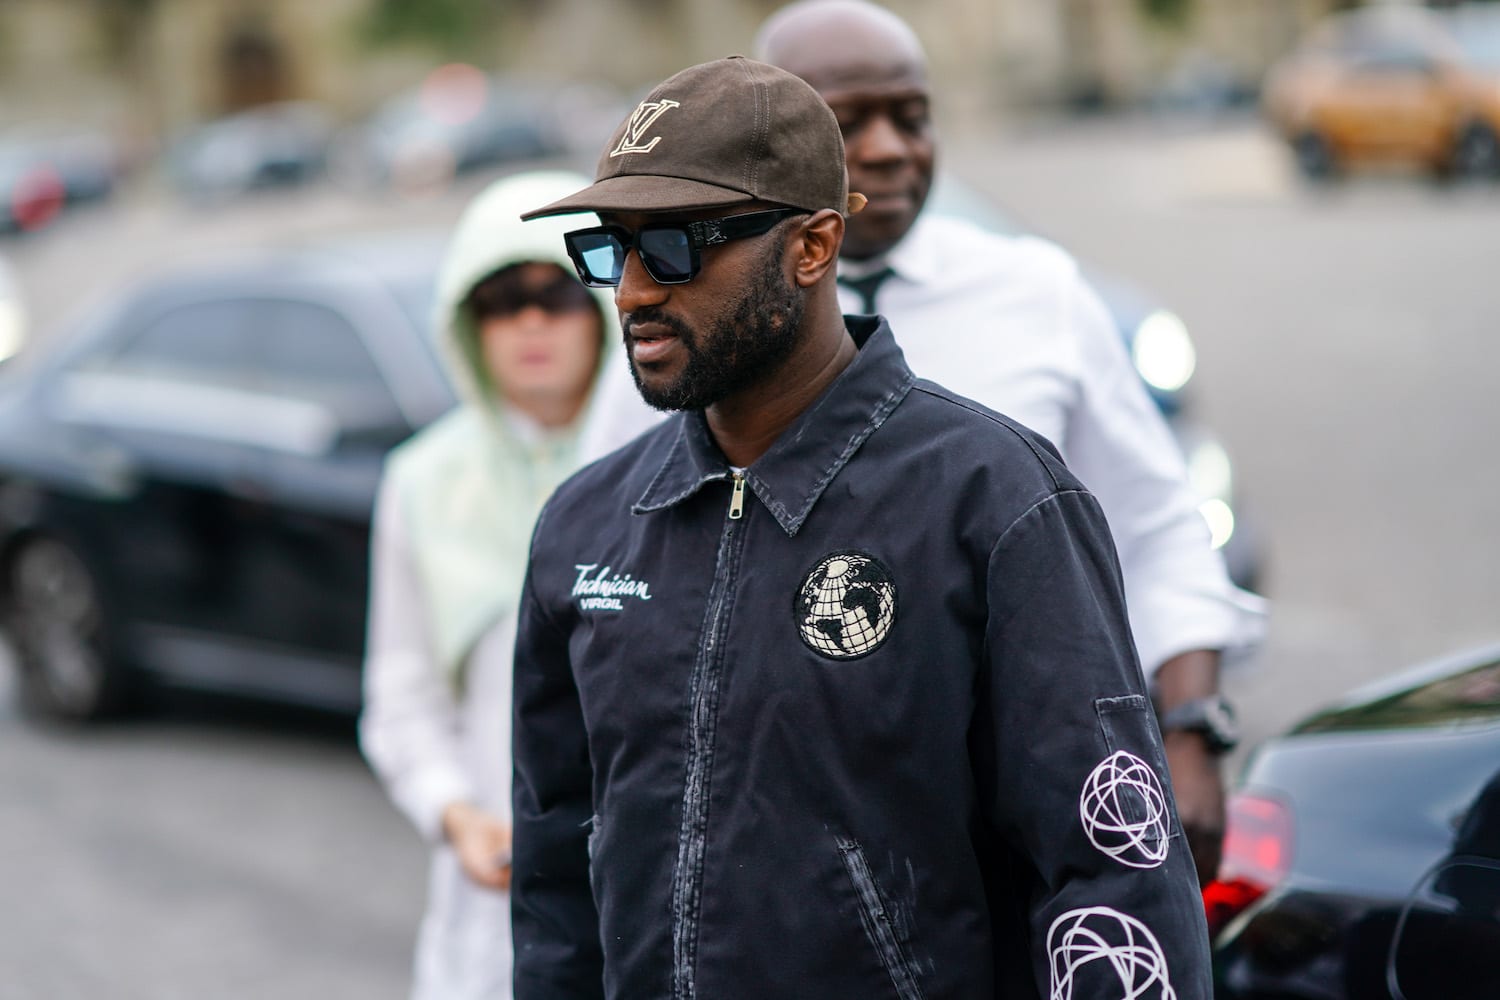 Virgil Abloh Sells Off-White to LVMH, Deepening Ties With Luxury